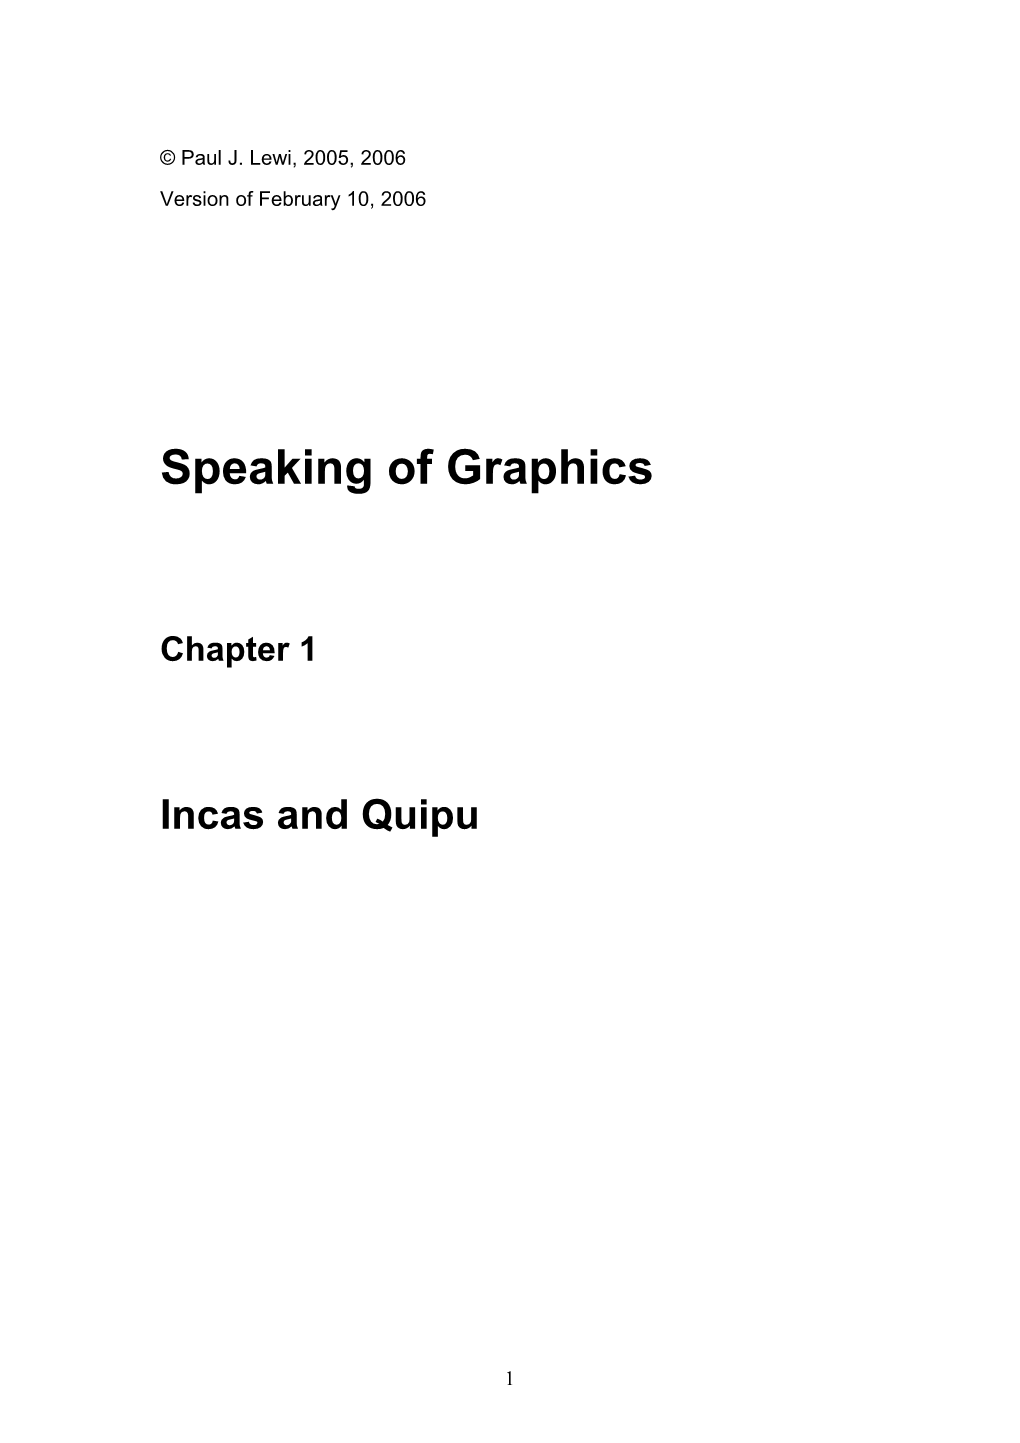 Chapter 1 Incas and Quipu